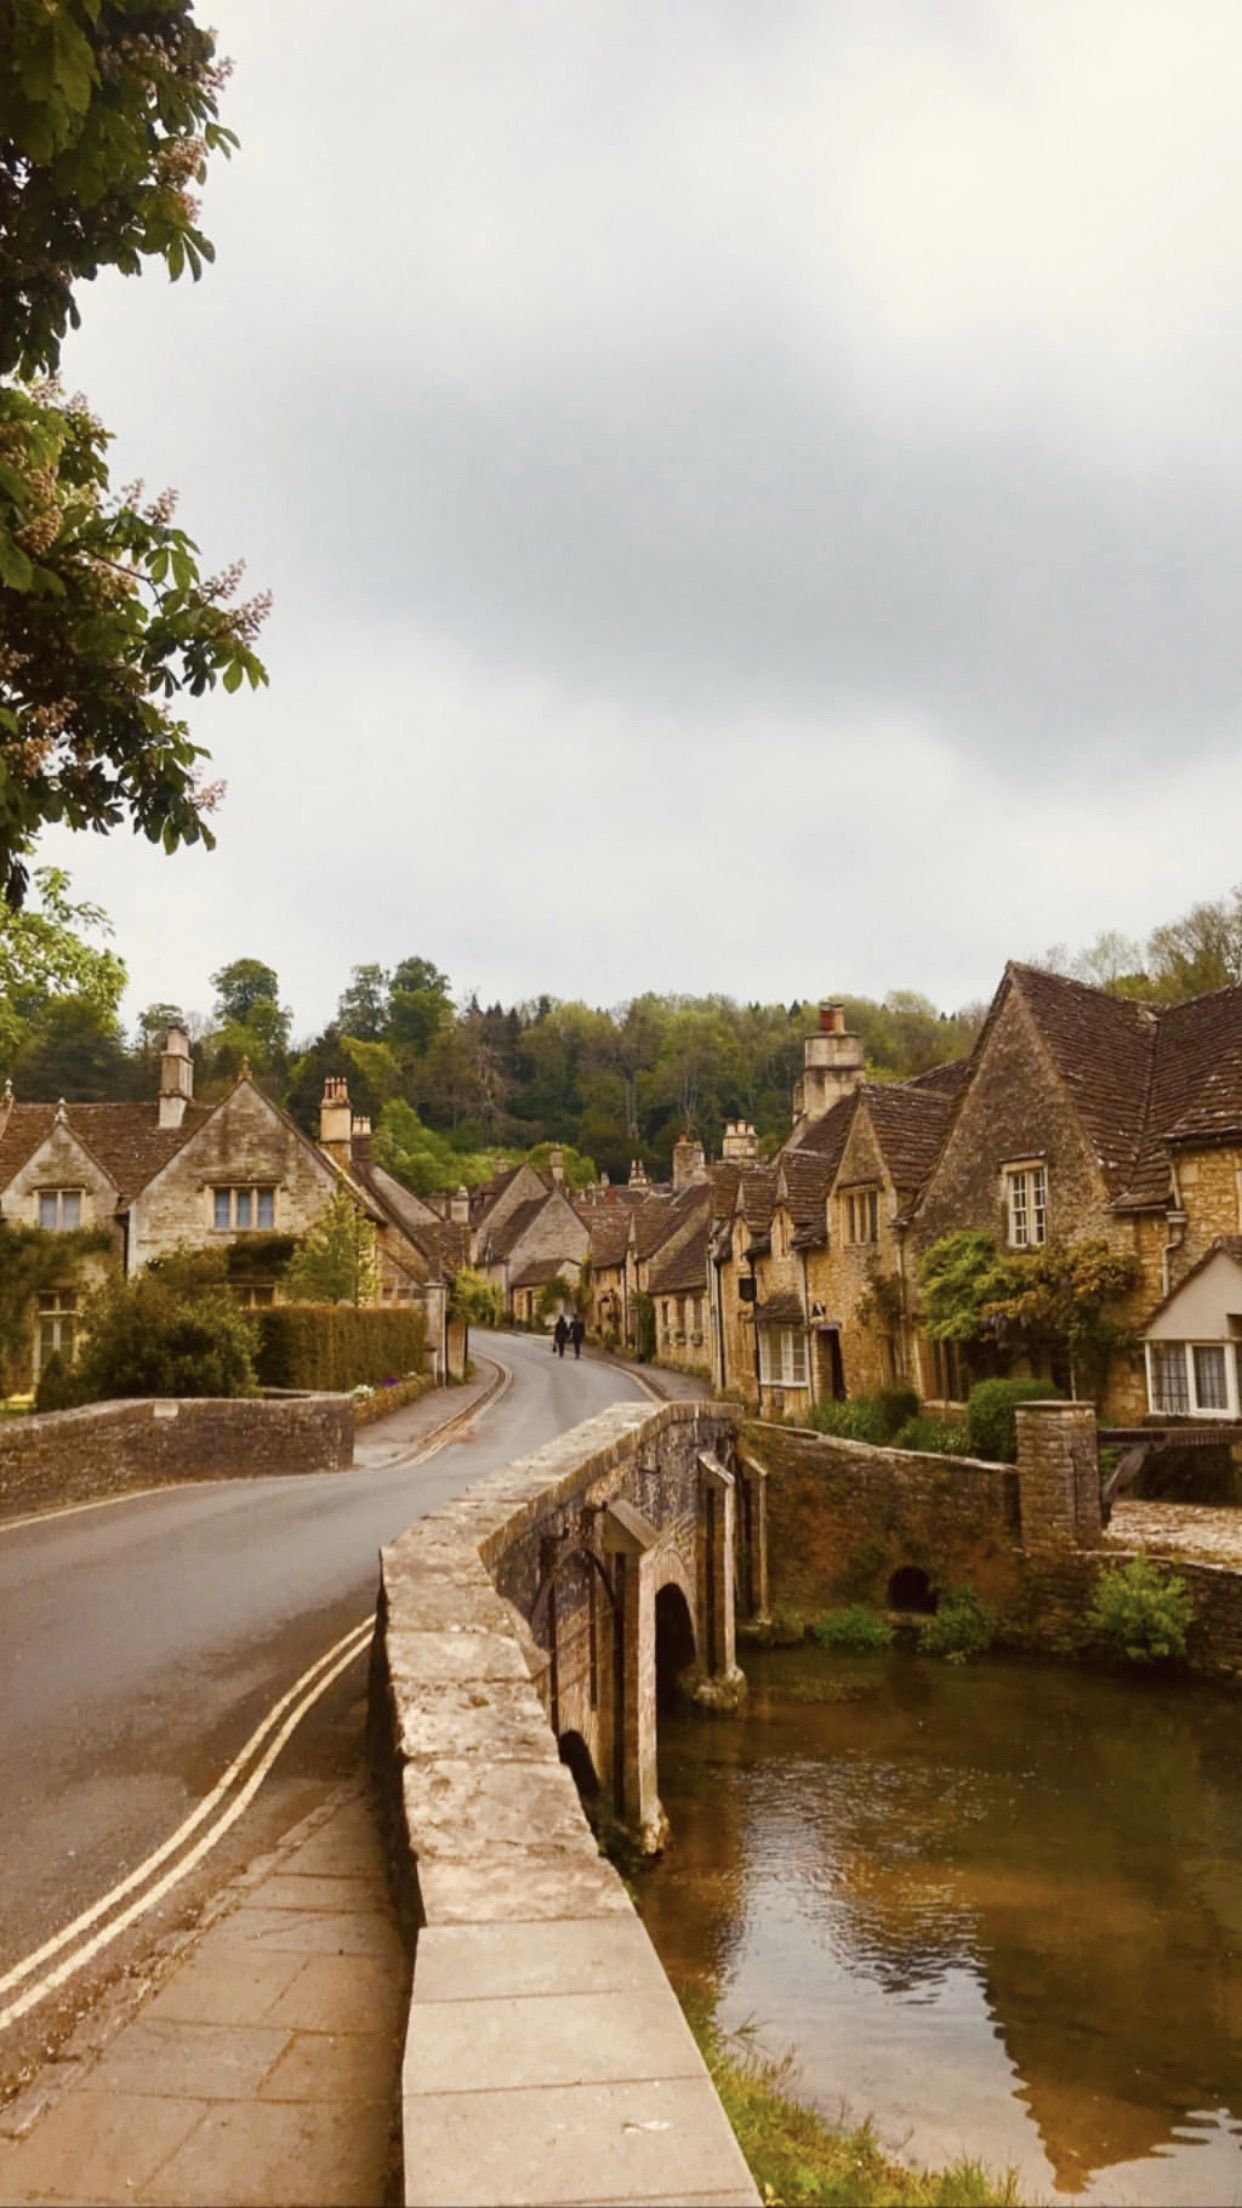 Cotswolds Wallpapers - Wallpaper Cave